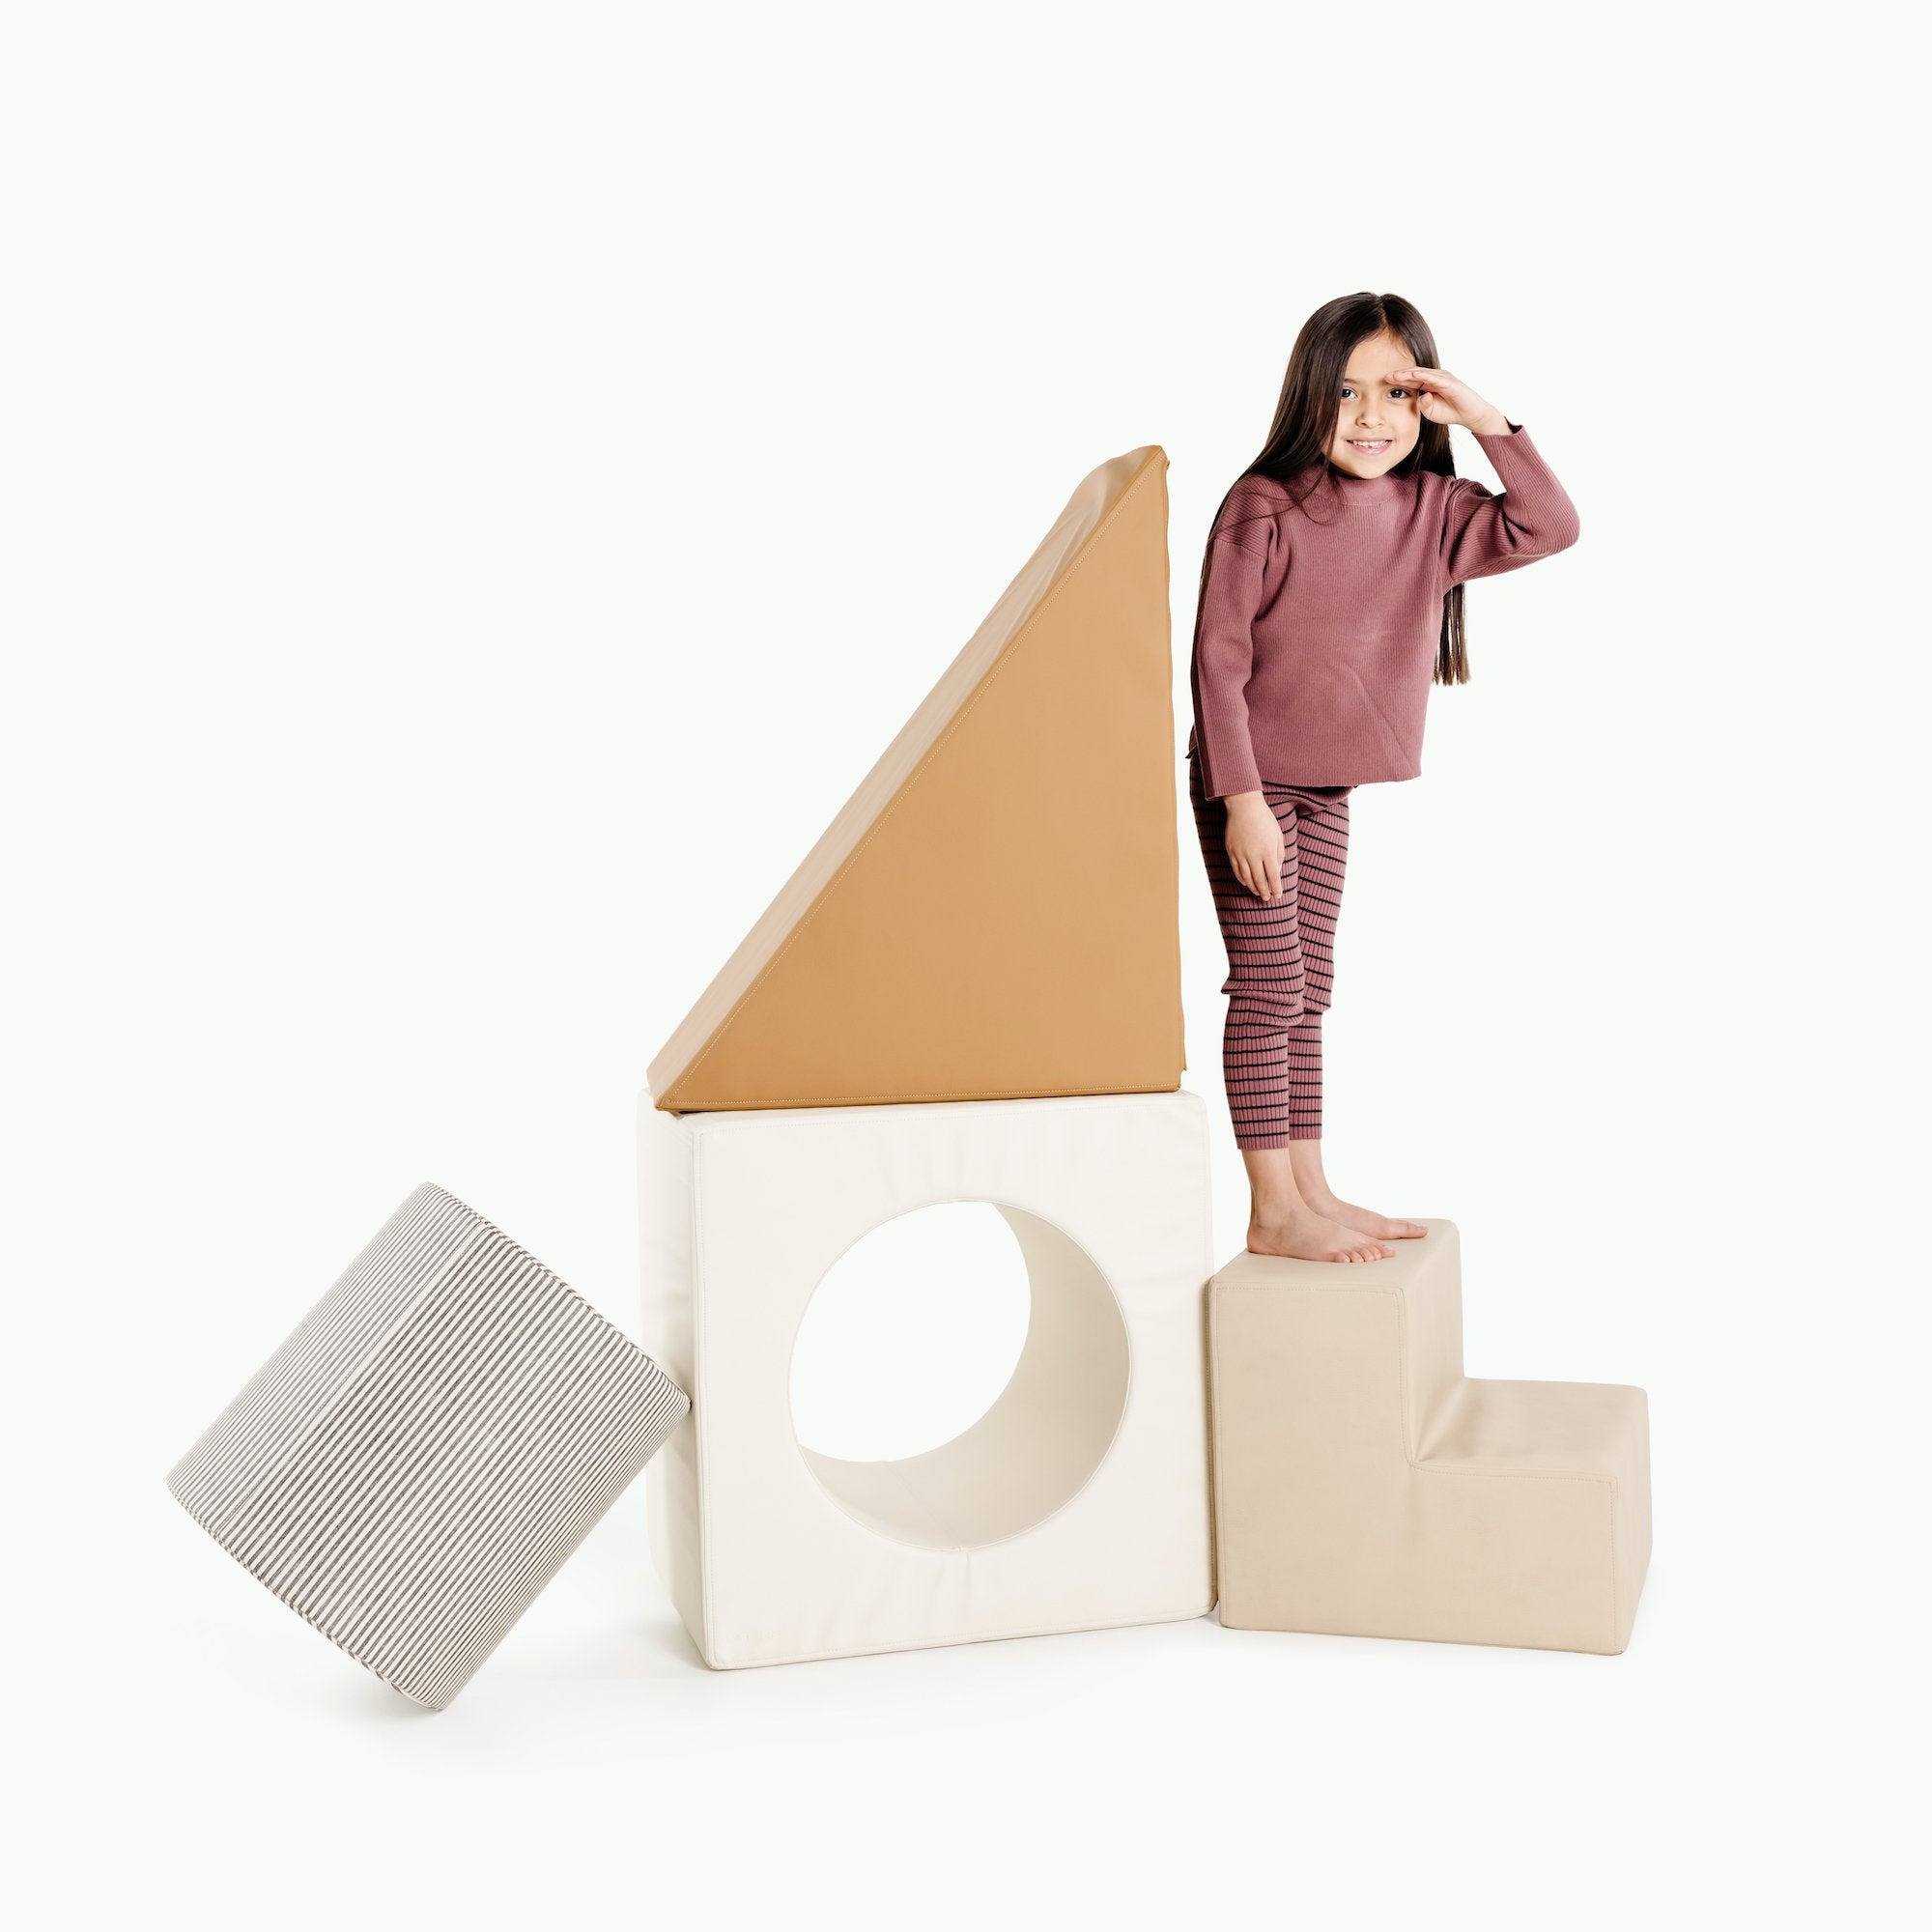 Camel • Ivory • Stone Stripe • Millet@Kid playing on the Camel Block Playset